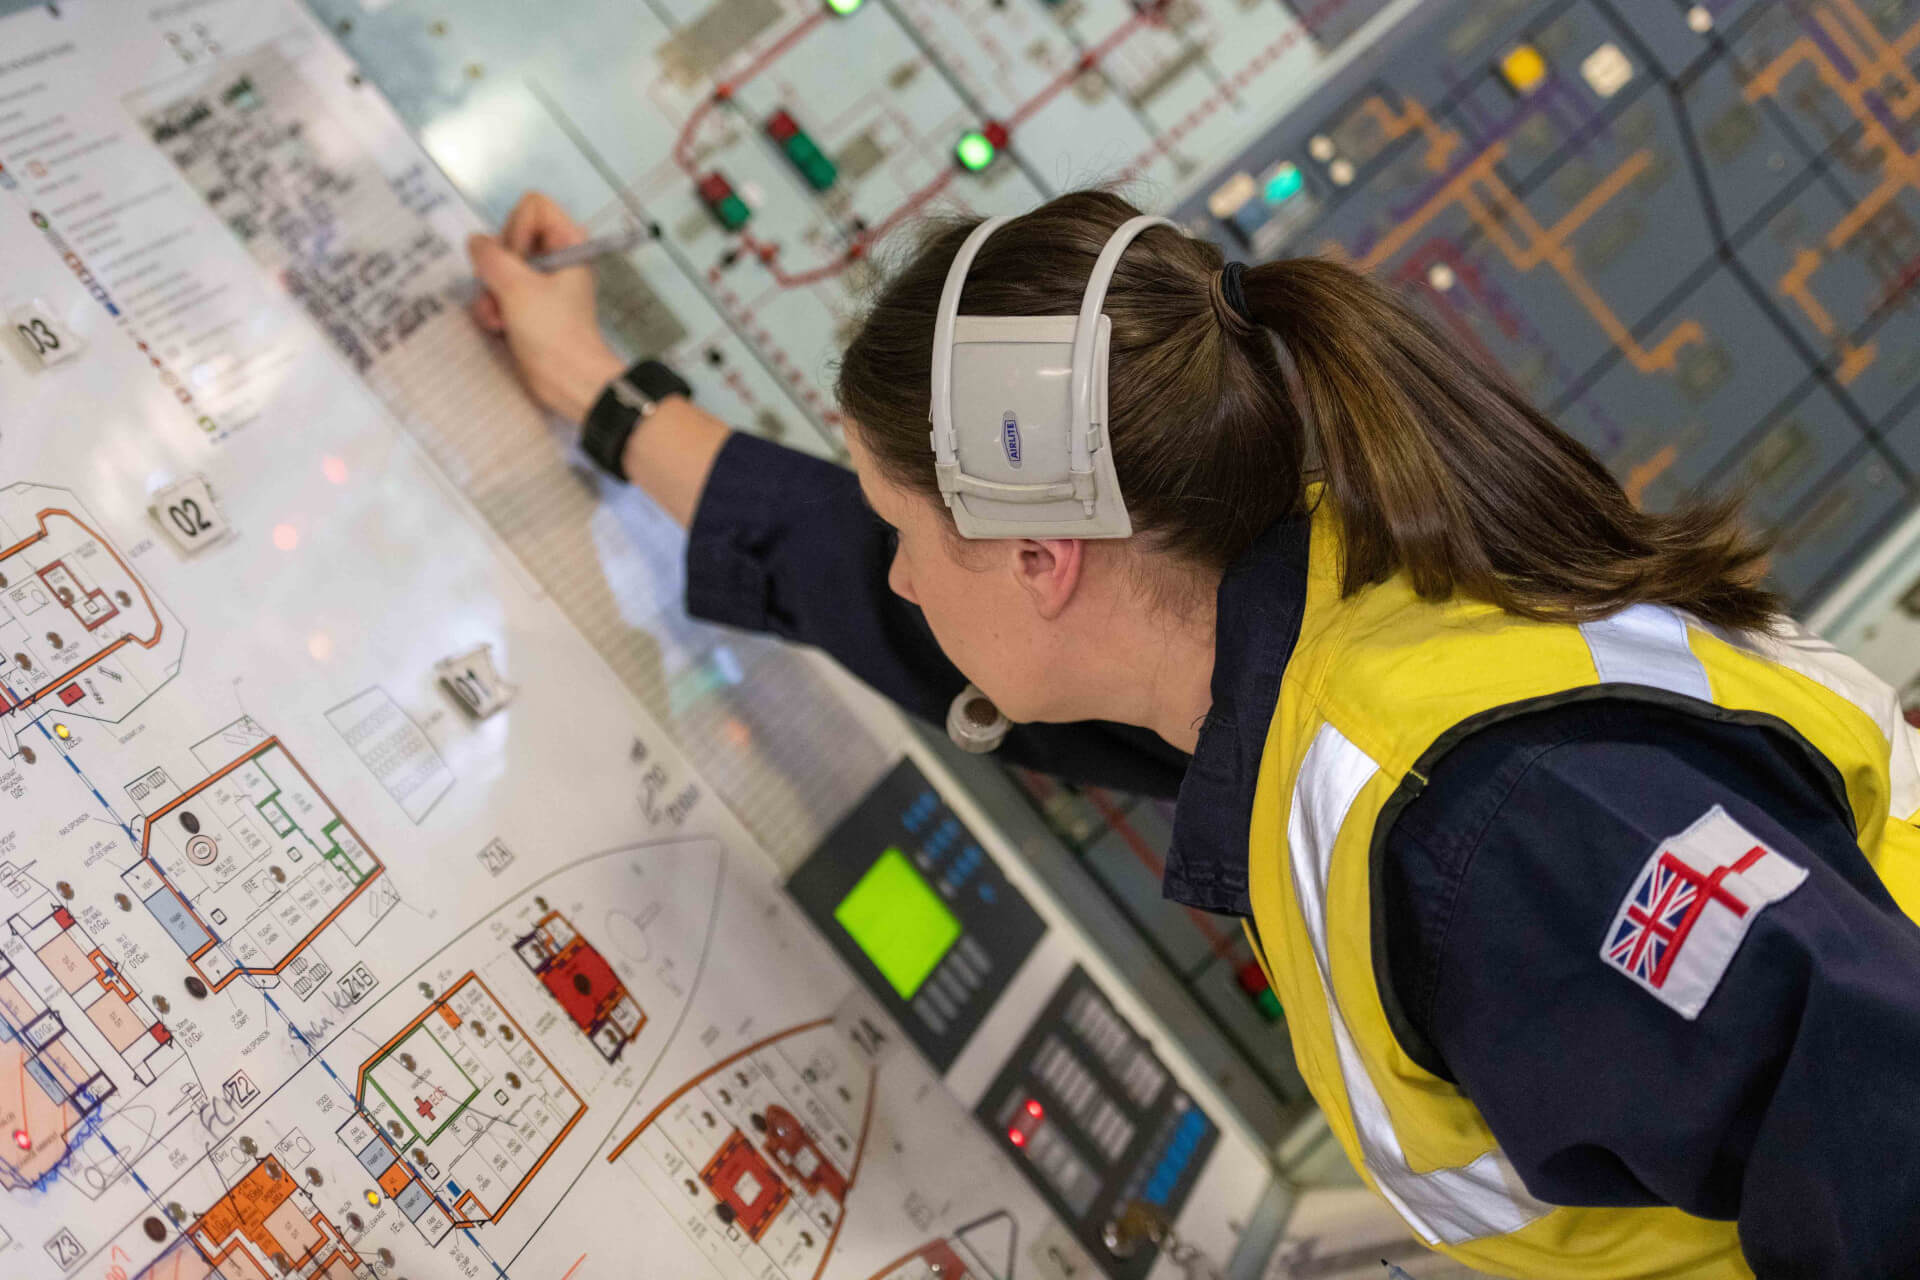 Female Royal Navy Technician working on Ships board, wearing a yellow high-vis jacket